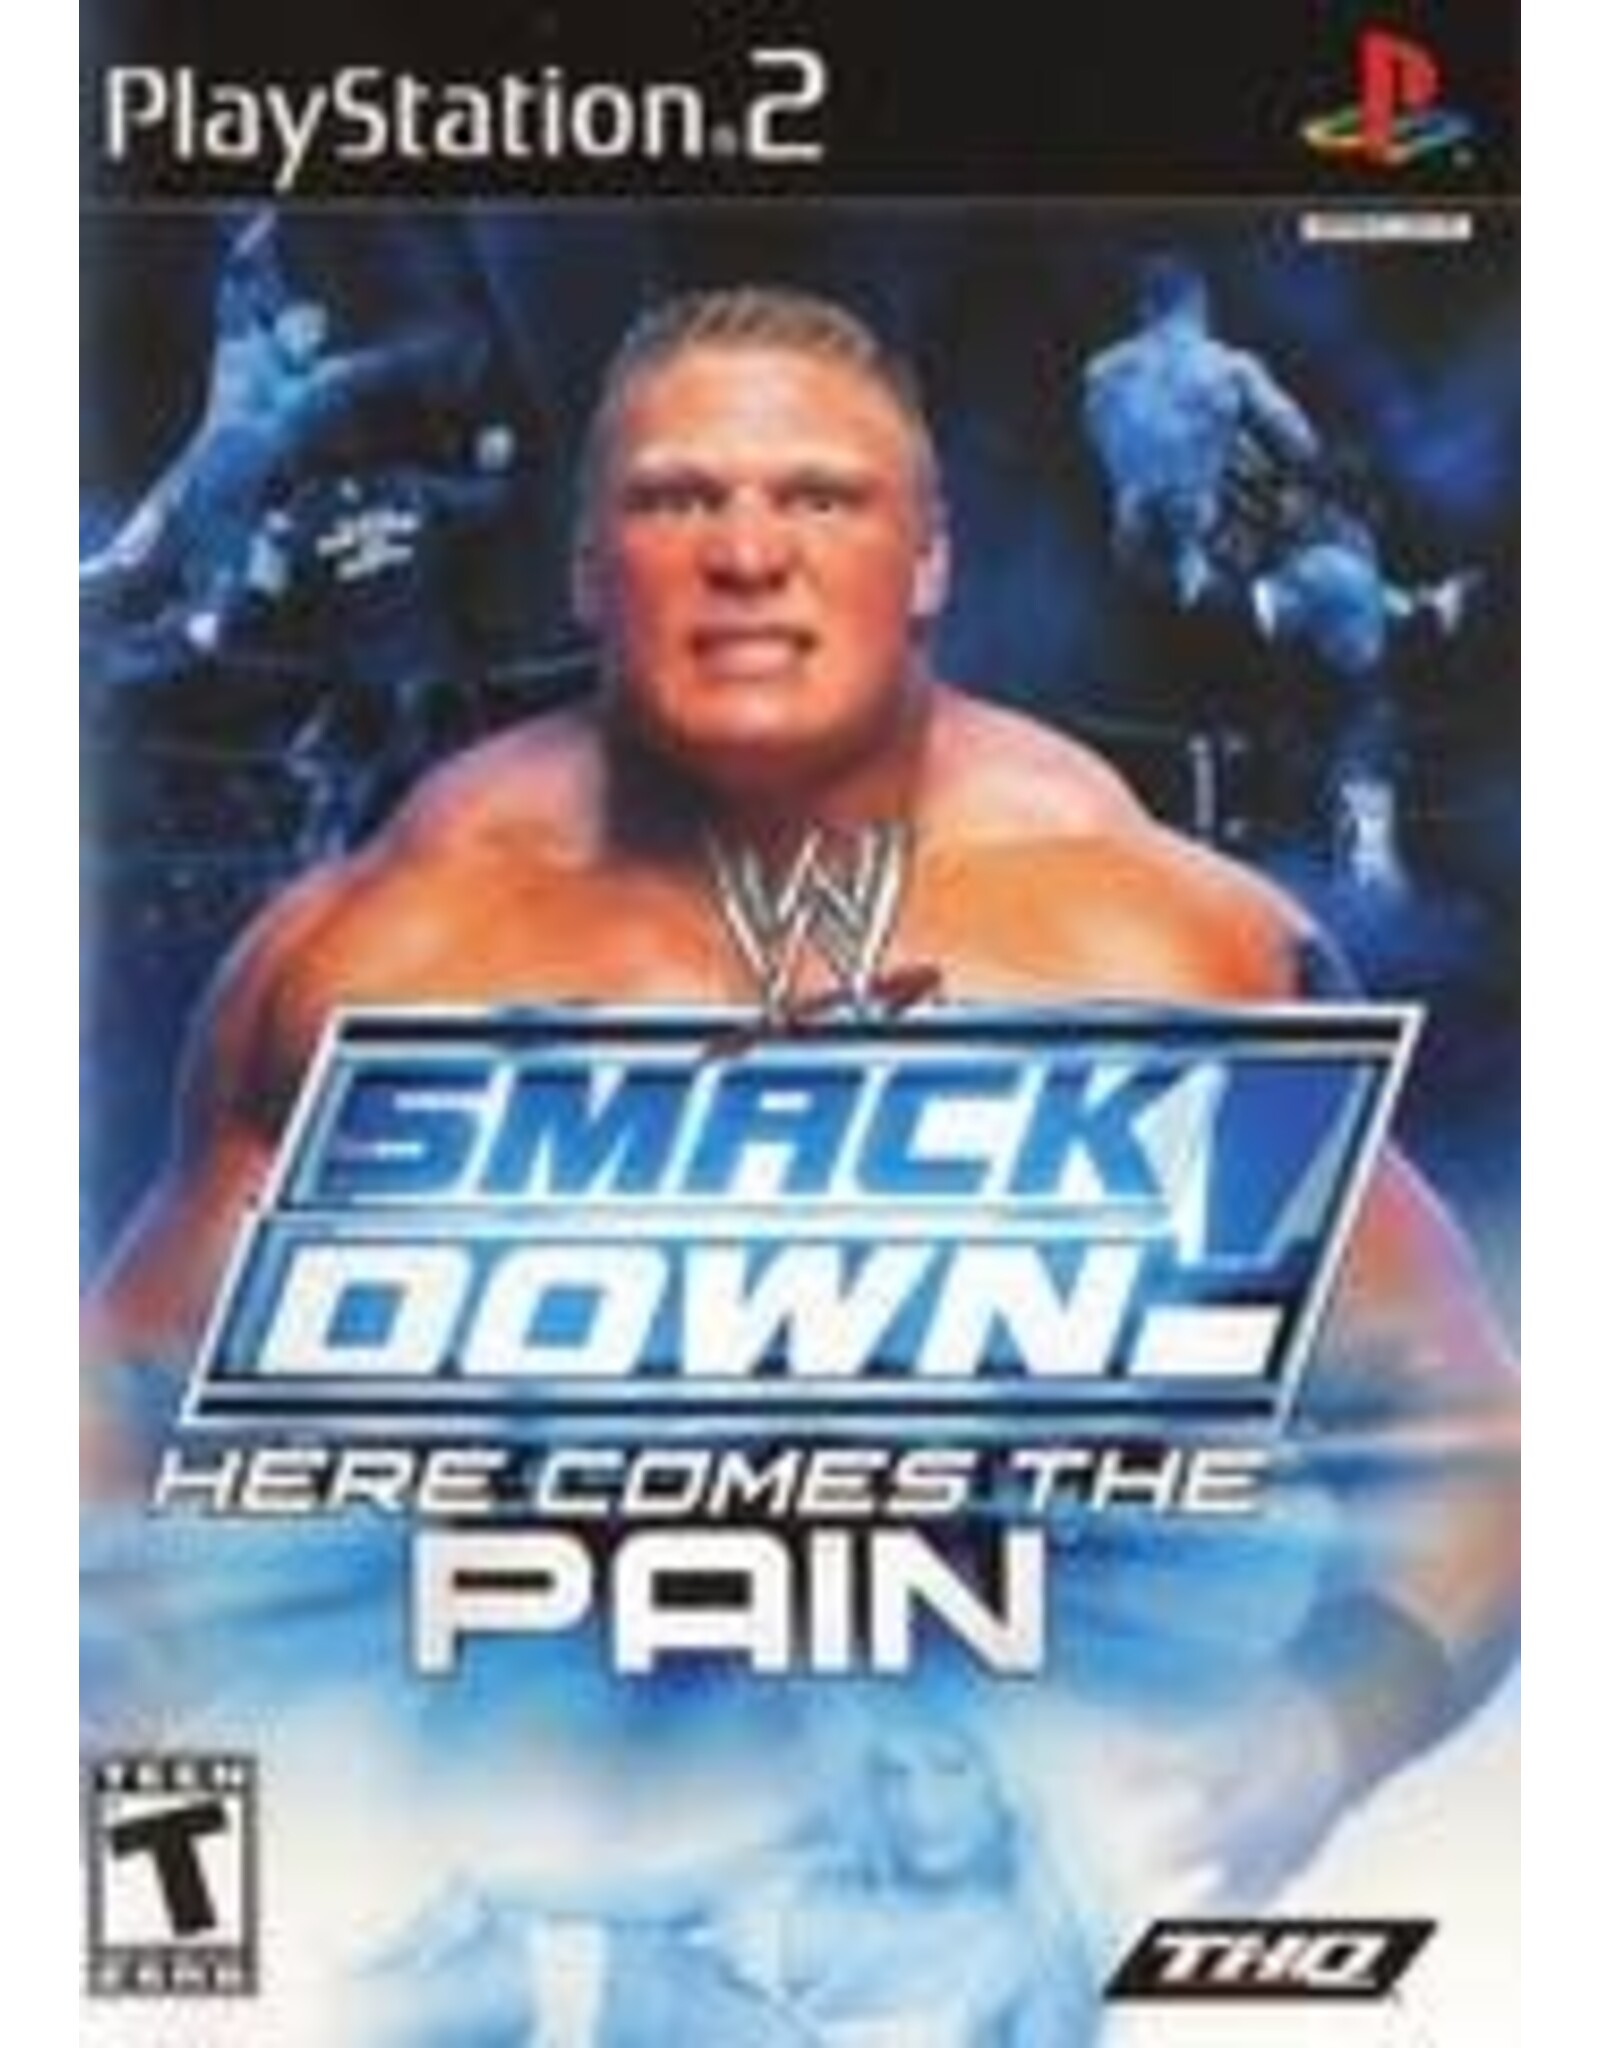 Playstation 2 WWE Smackdown Here Comes the Pain (CiB)